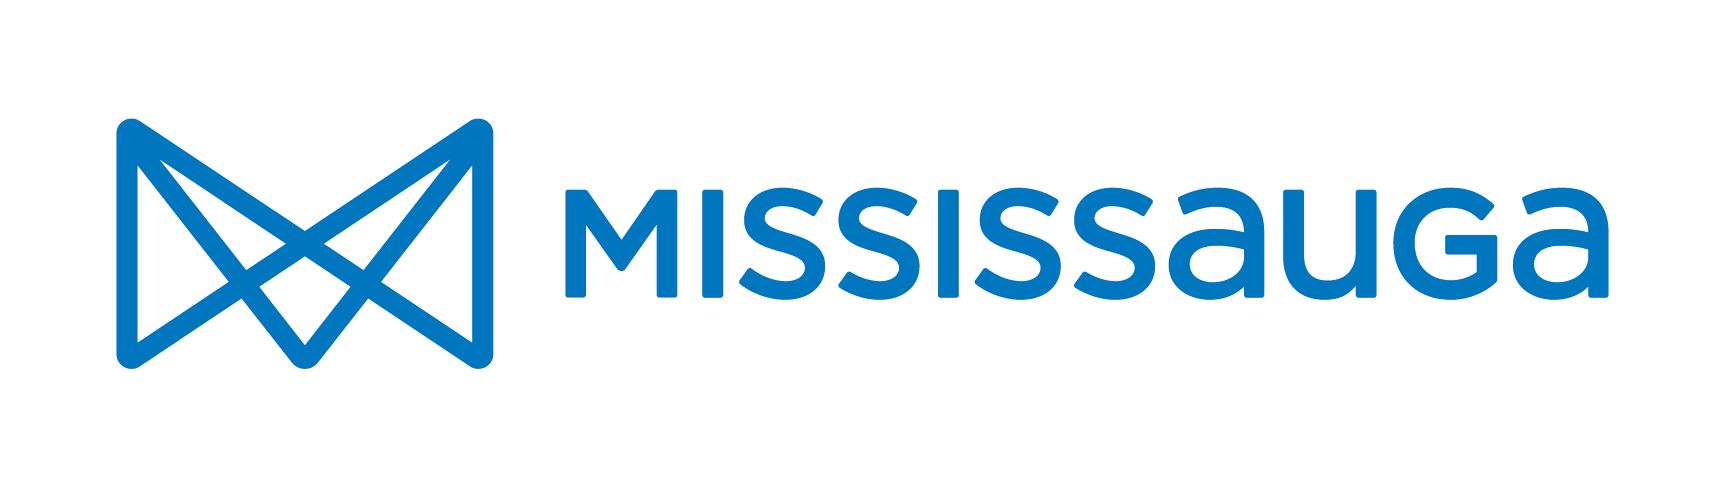 Blue City of Mississauga logo in horizontal format